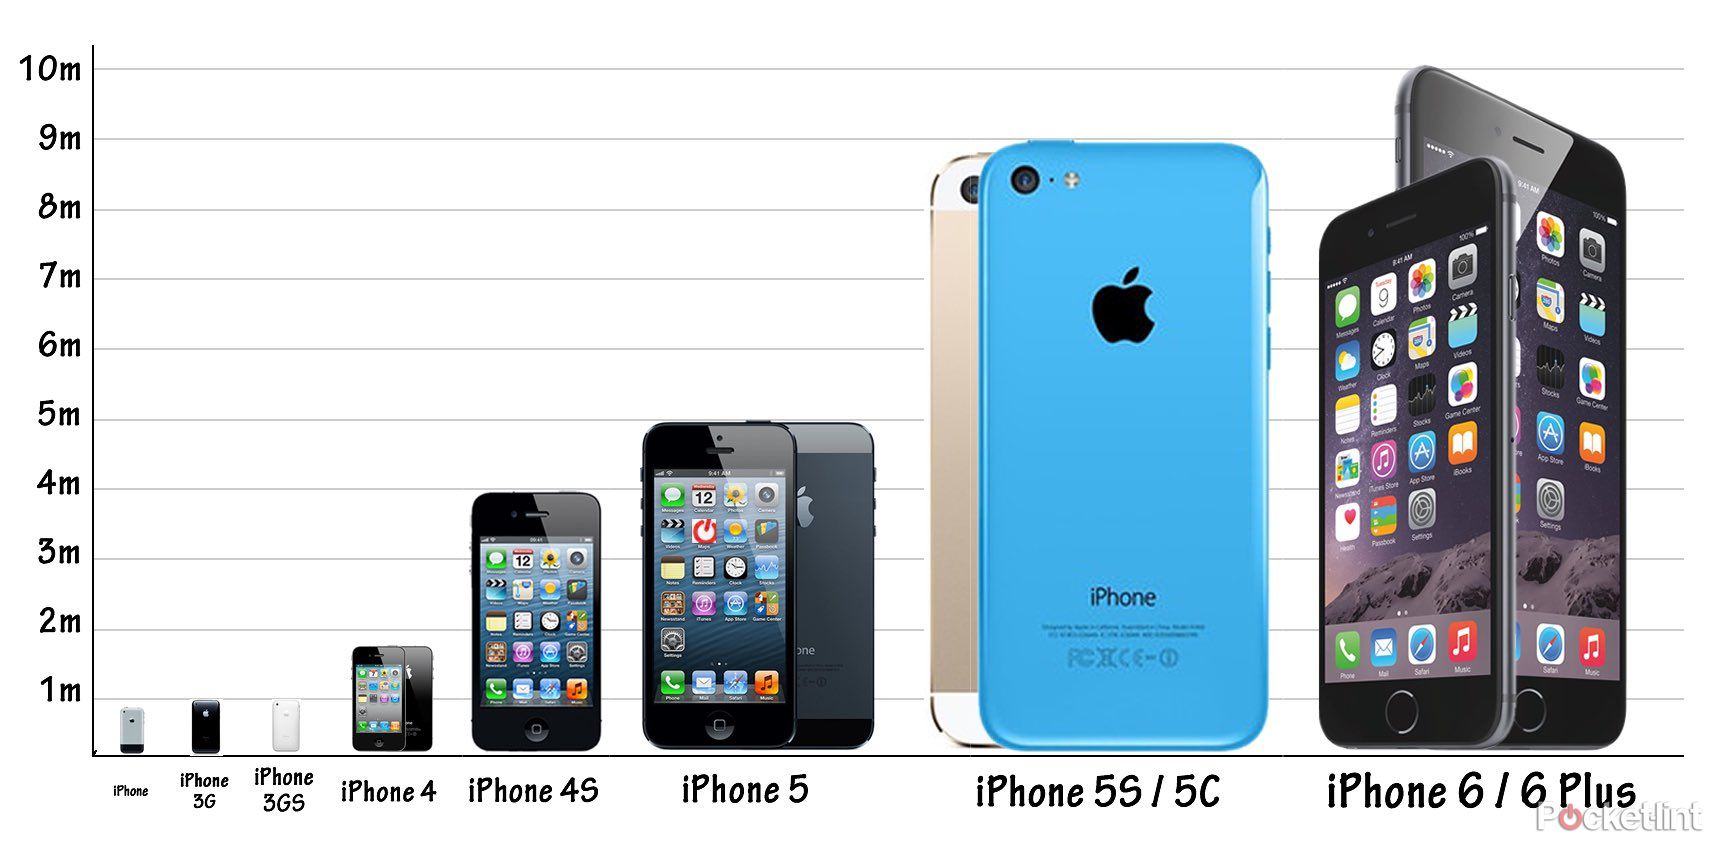 just how popular are the iphone 6 and iphone 6 plus  image 1